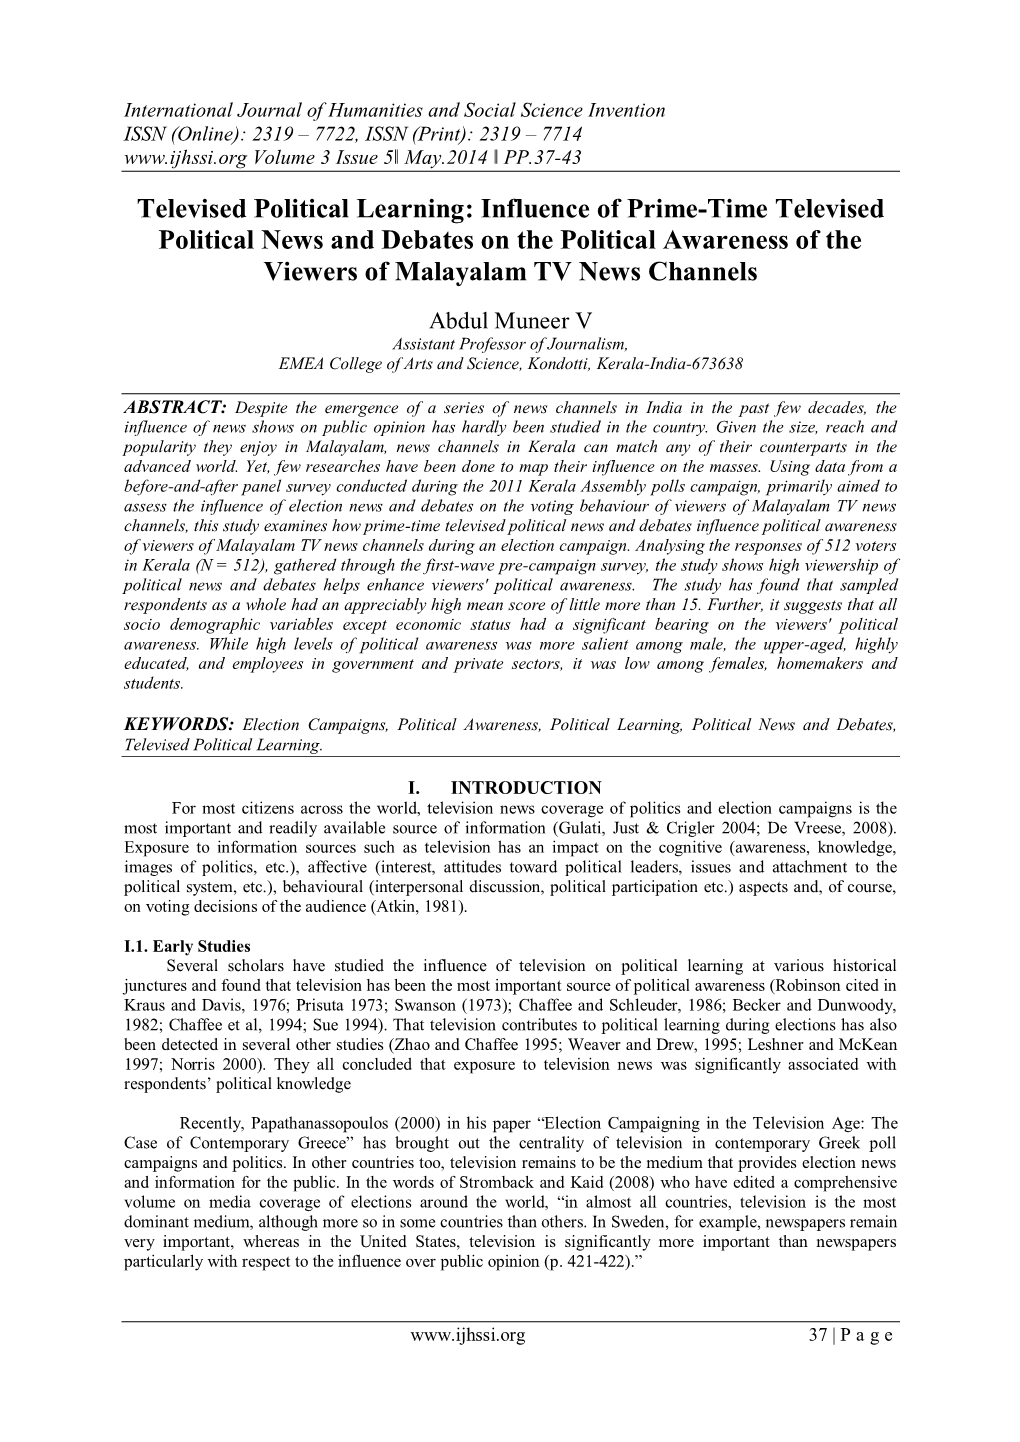 Influence of Prime-Time Televised Political News and Debates on the Political Awareness of the Viewers of Malayalam TV News Channels